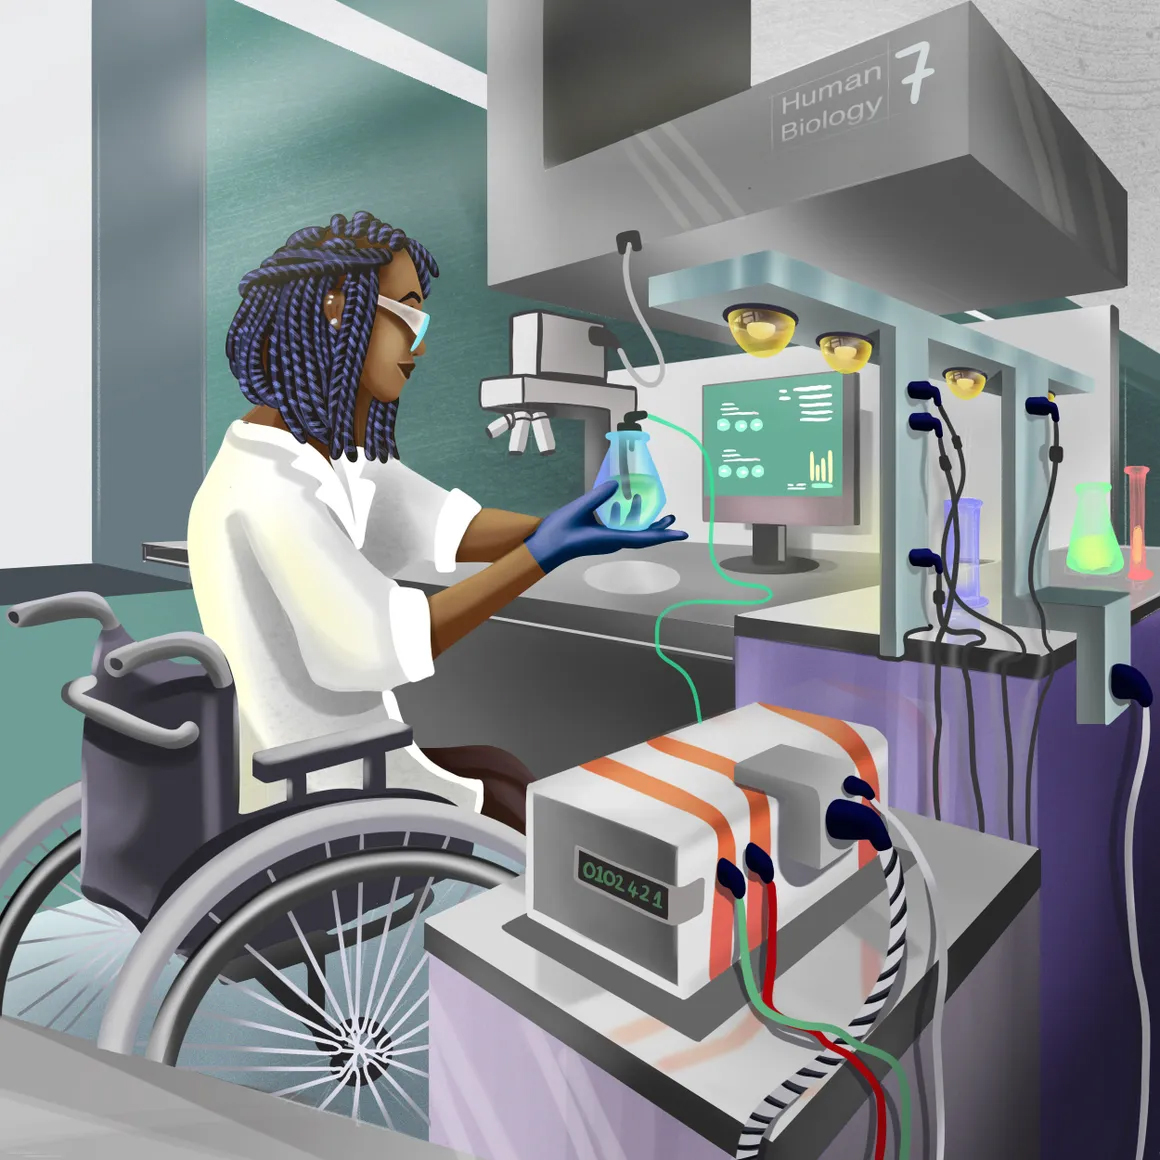 A graphic depicting a woman conducting research in a biological anthropology lab.